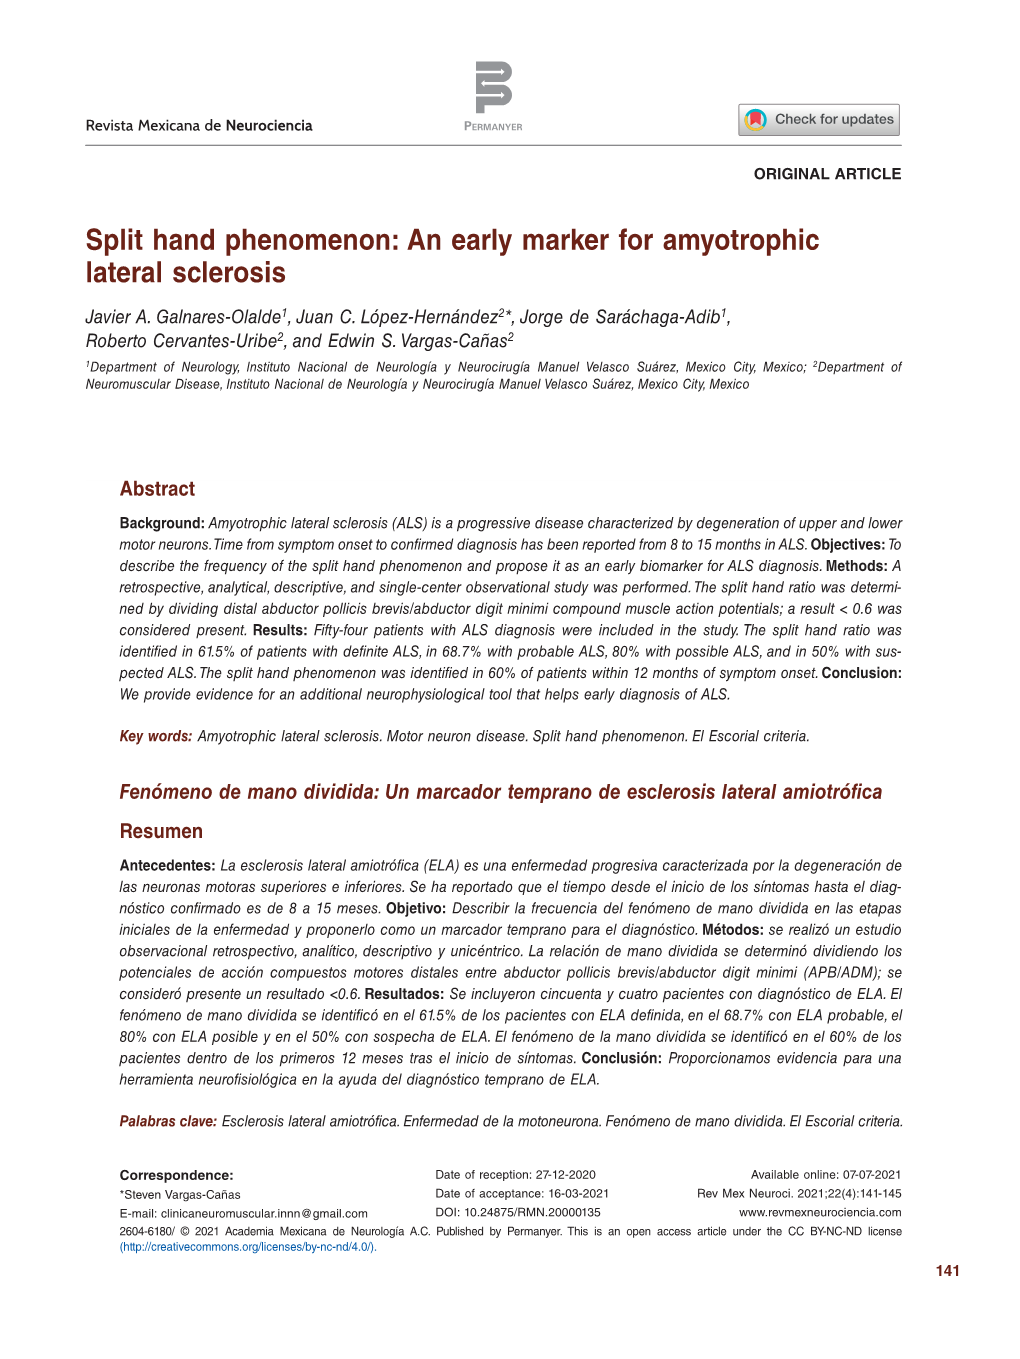 Split Hand Phenomenon: an Early Marker for Amyotrophic Lateral Sclerosis